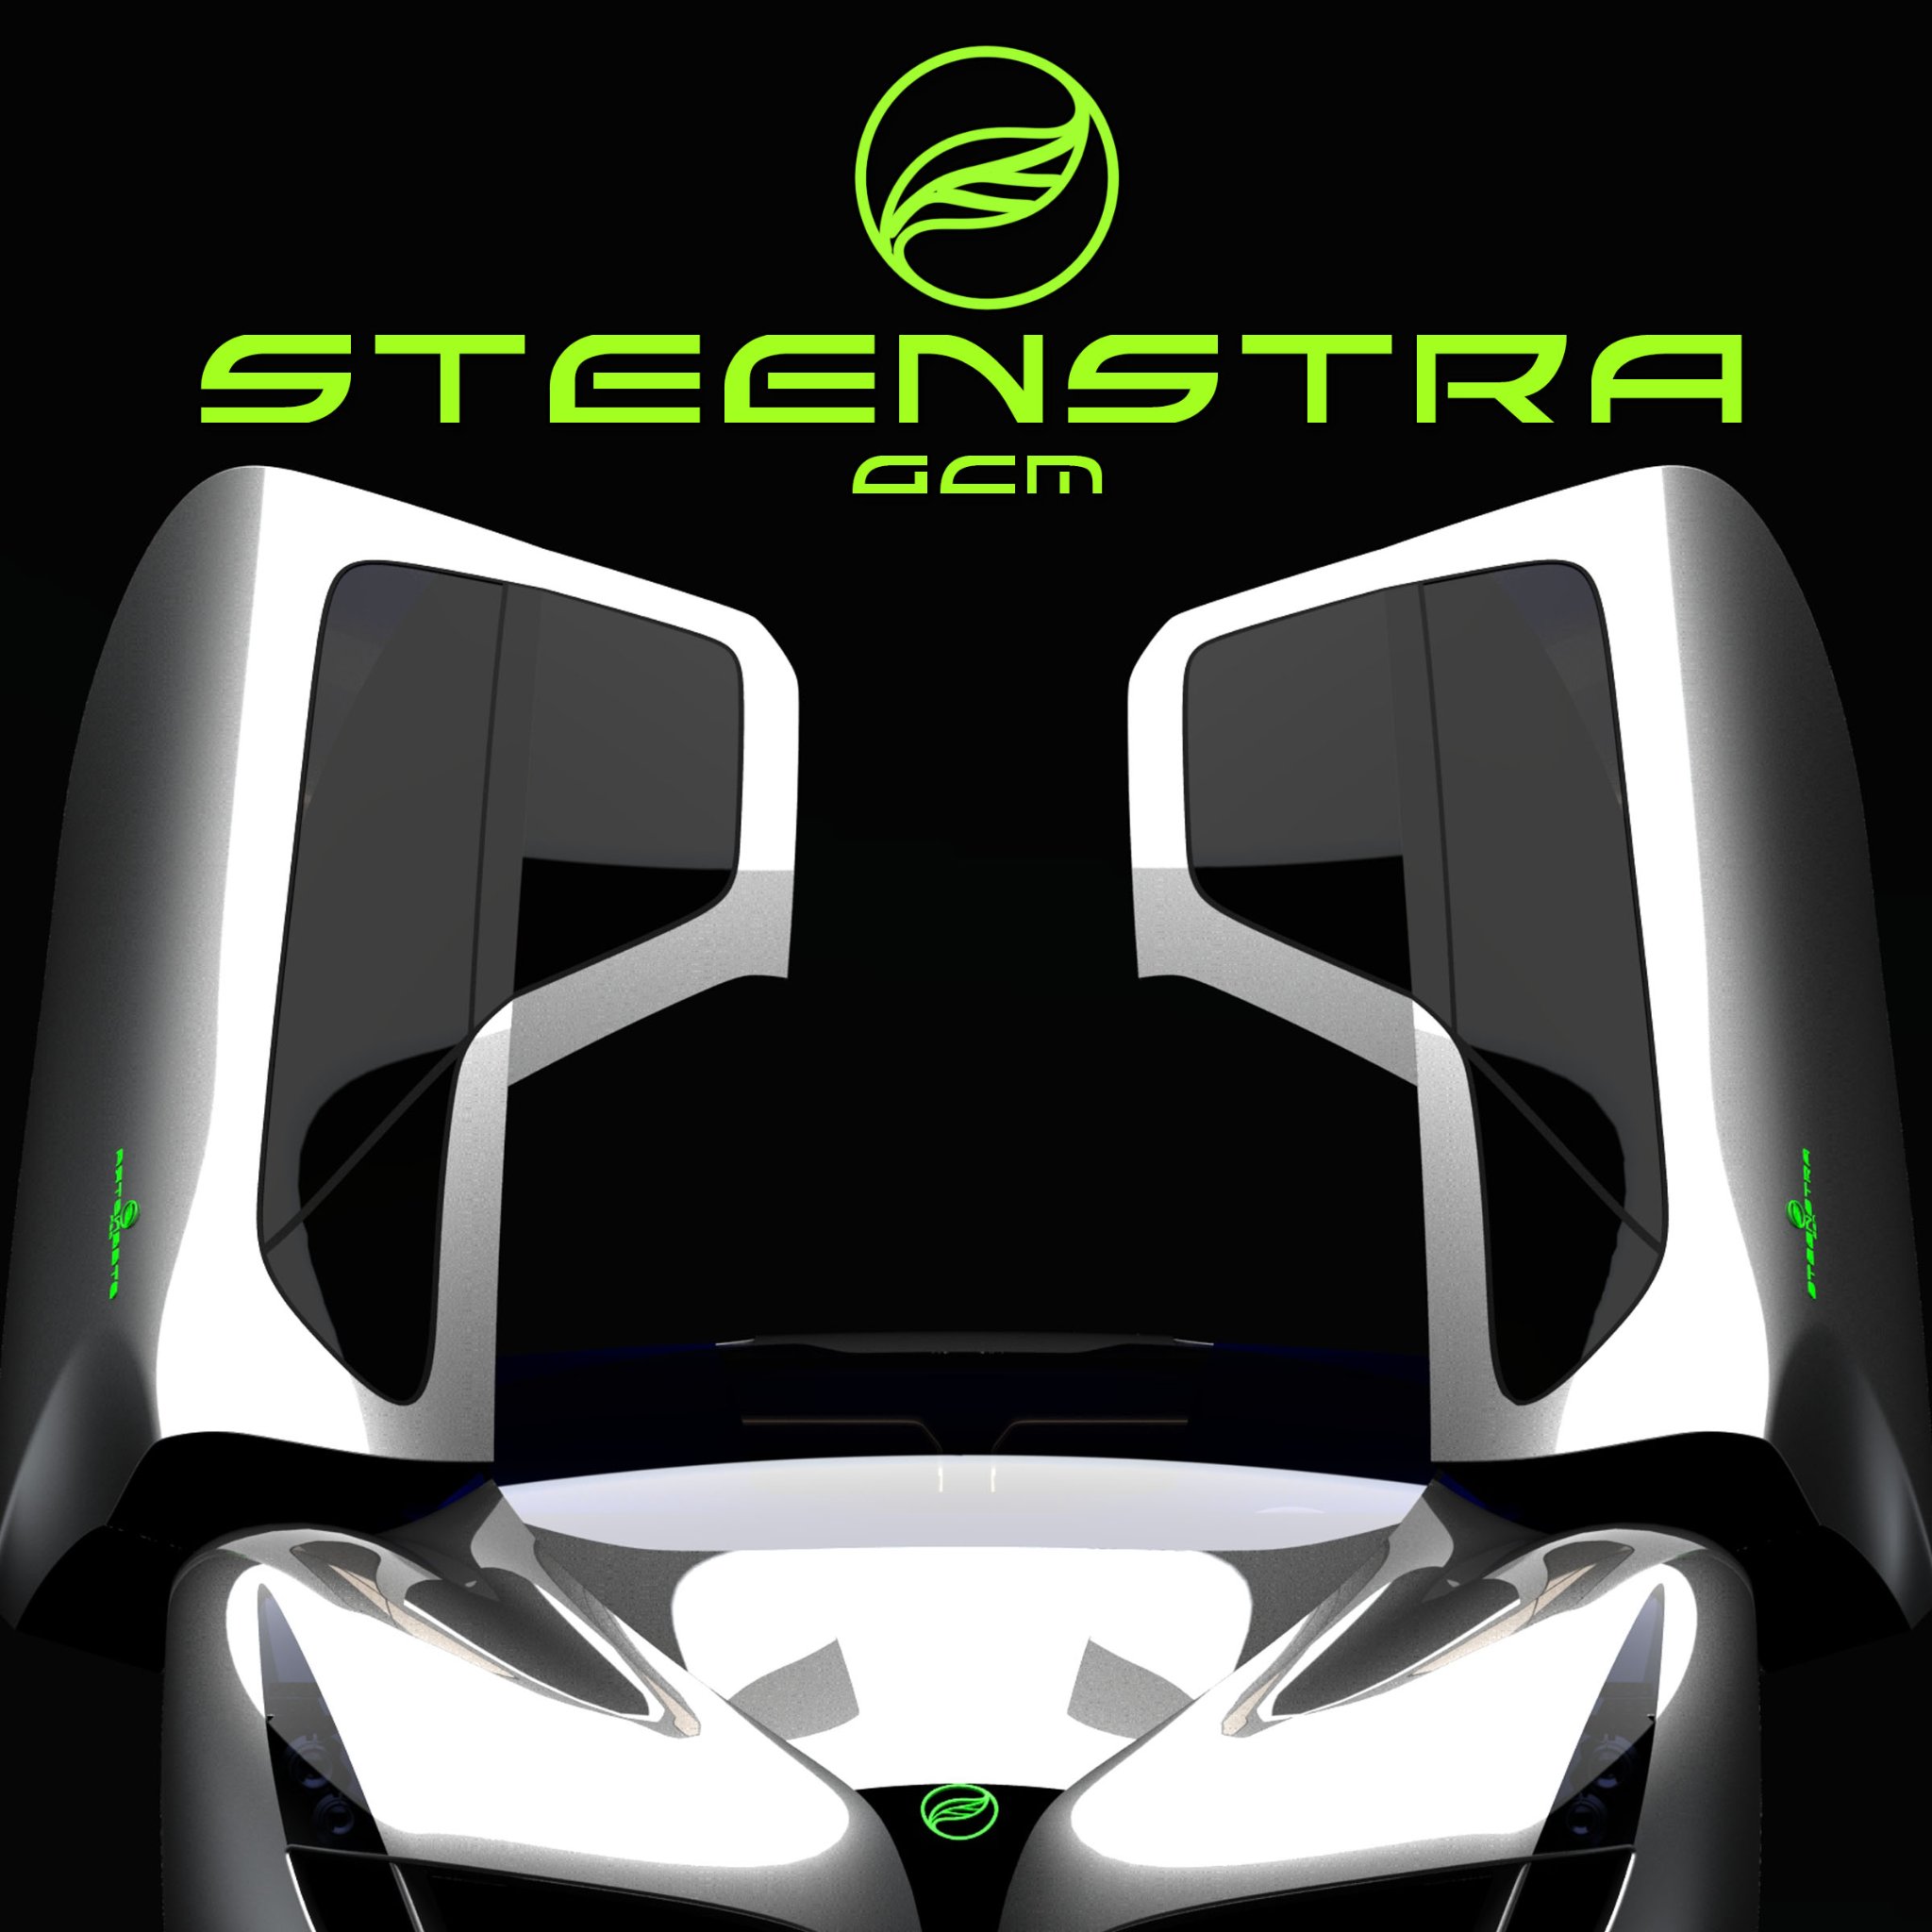 Zero Emission Super Car Startup from California, USA, founded by 35 year veteran car designer Cor Steenstra of Volvo, Mercedes-Benz and Porsche.